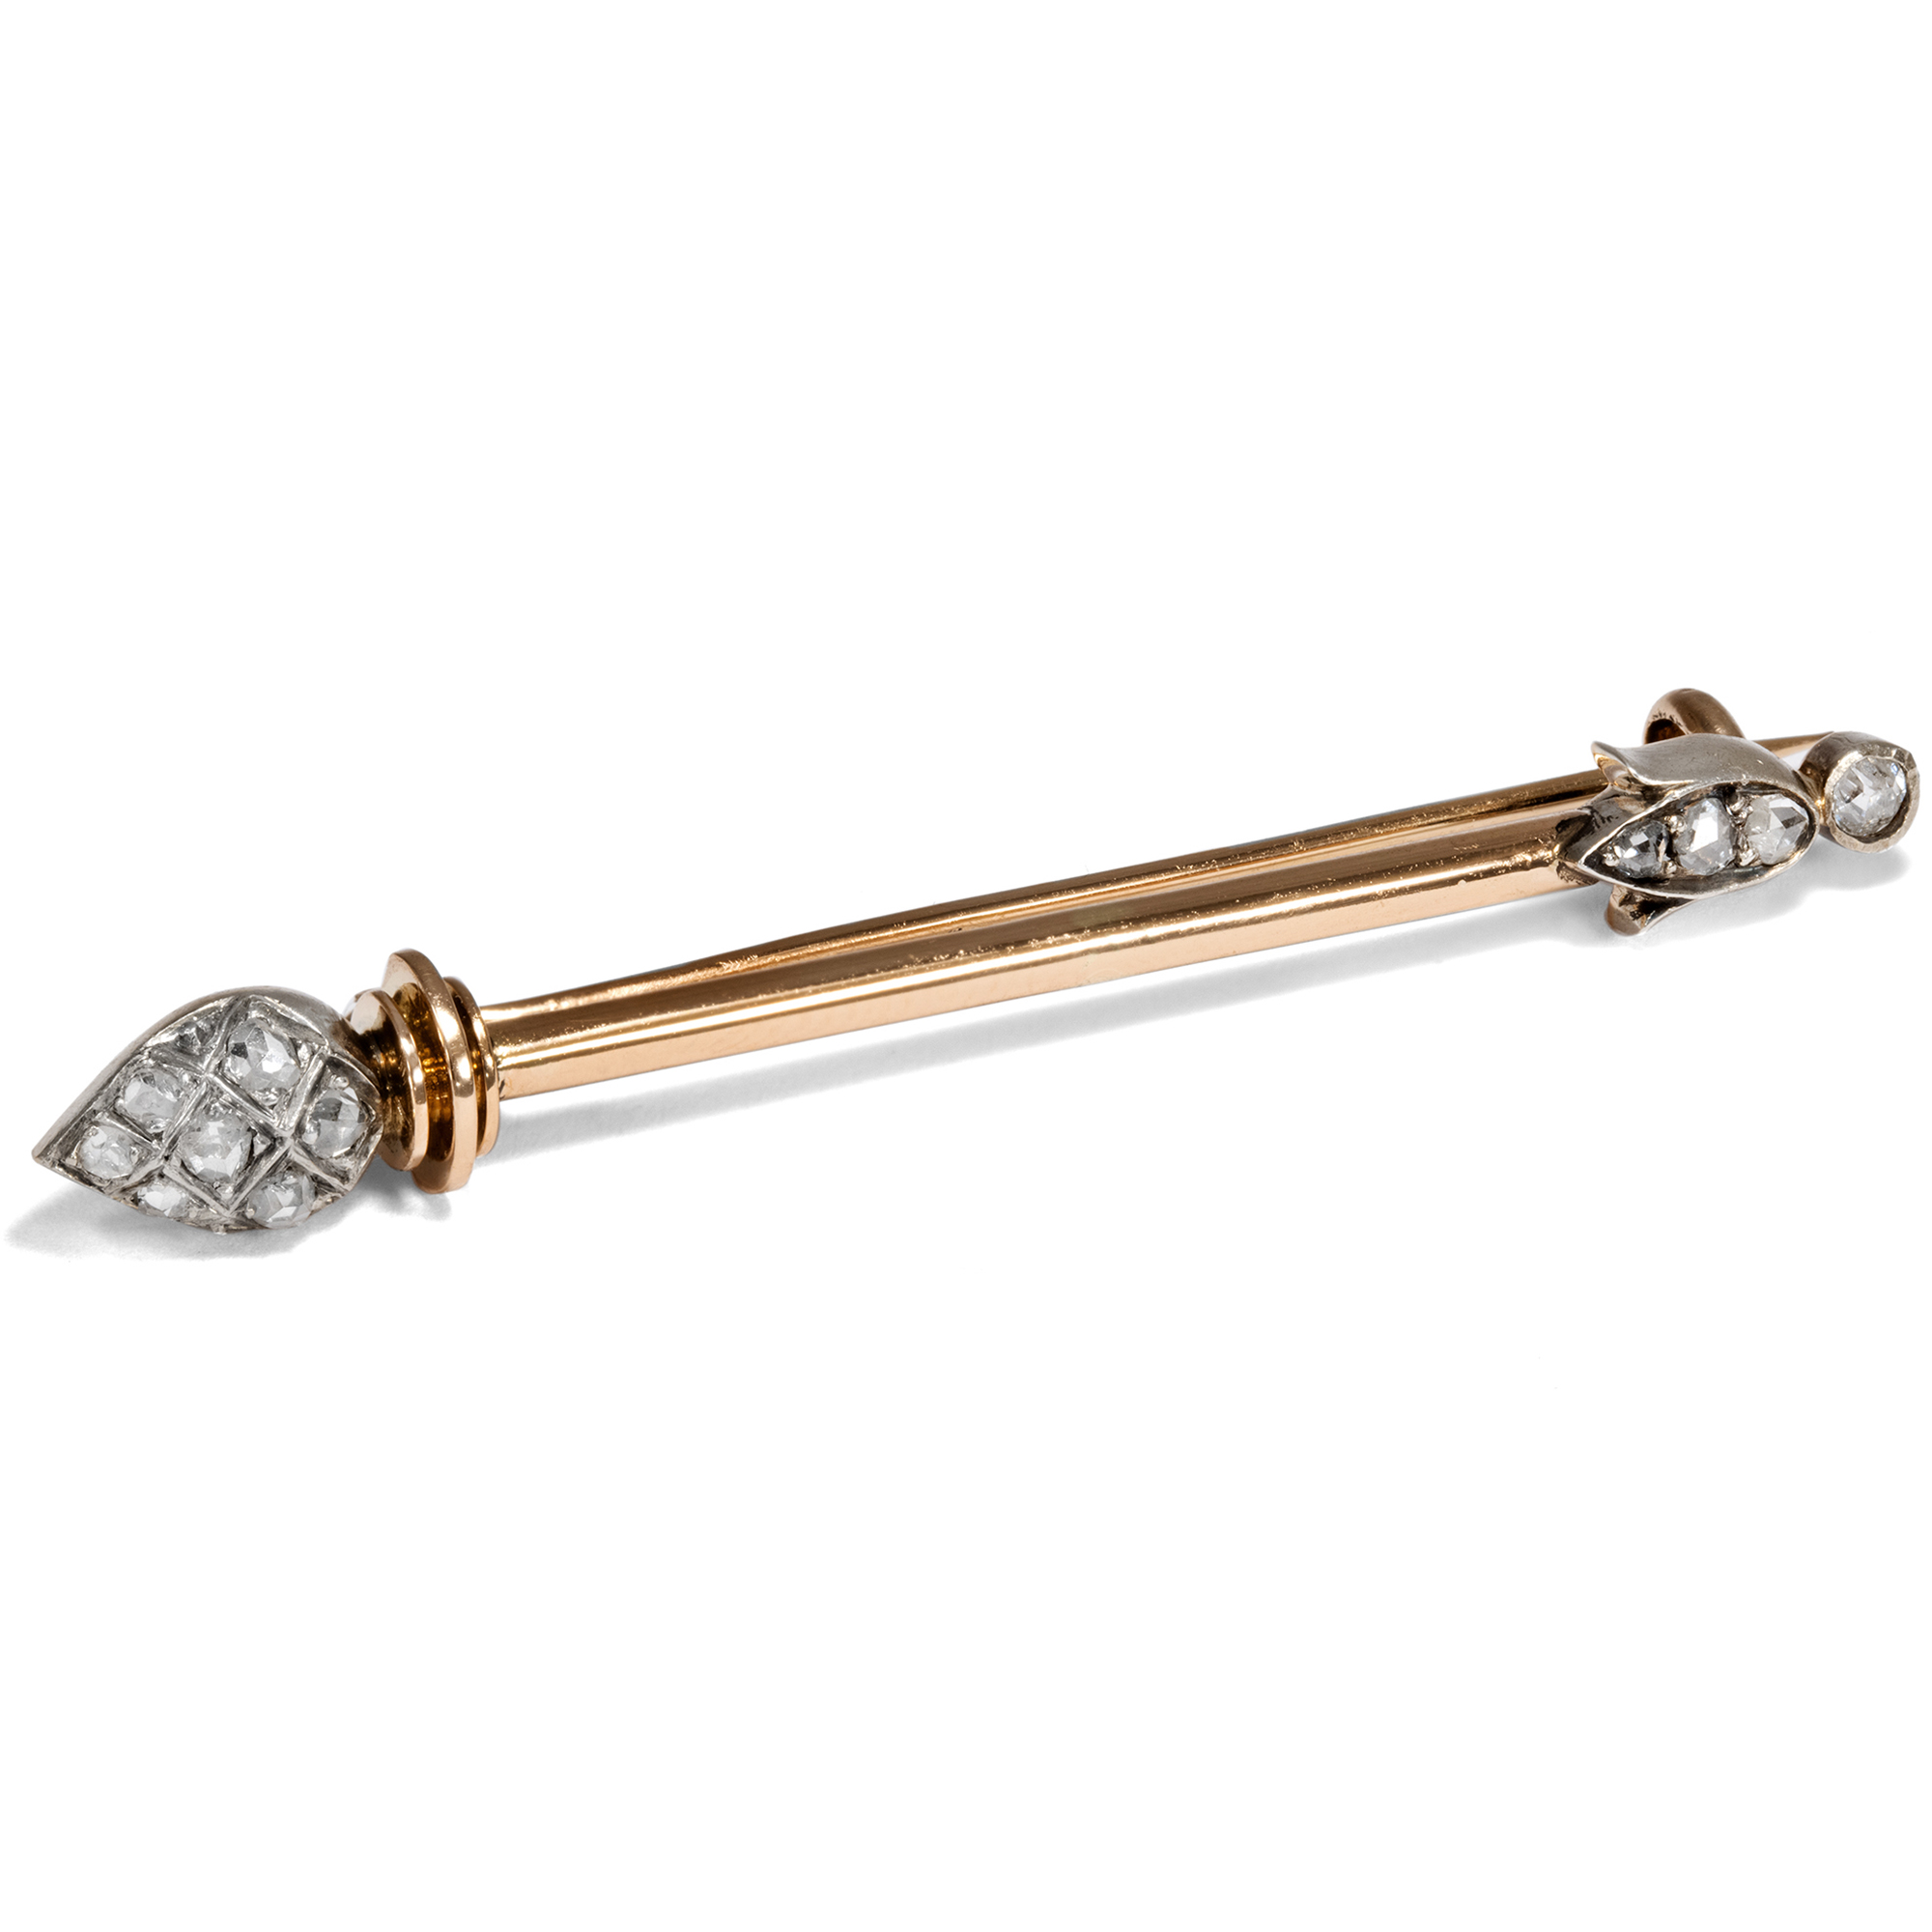 Antique Brooch In Shape Of Thyrsos Staff With Diamonds In Gold & Silver, Circa 1890